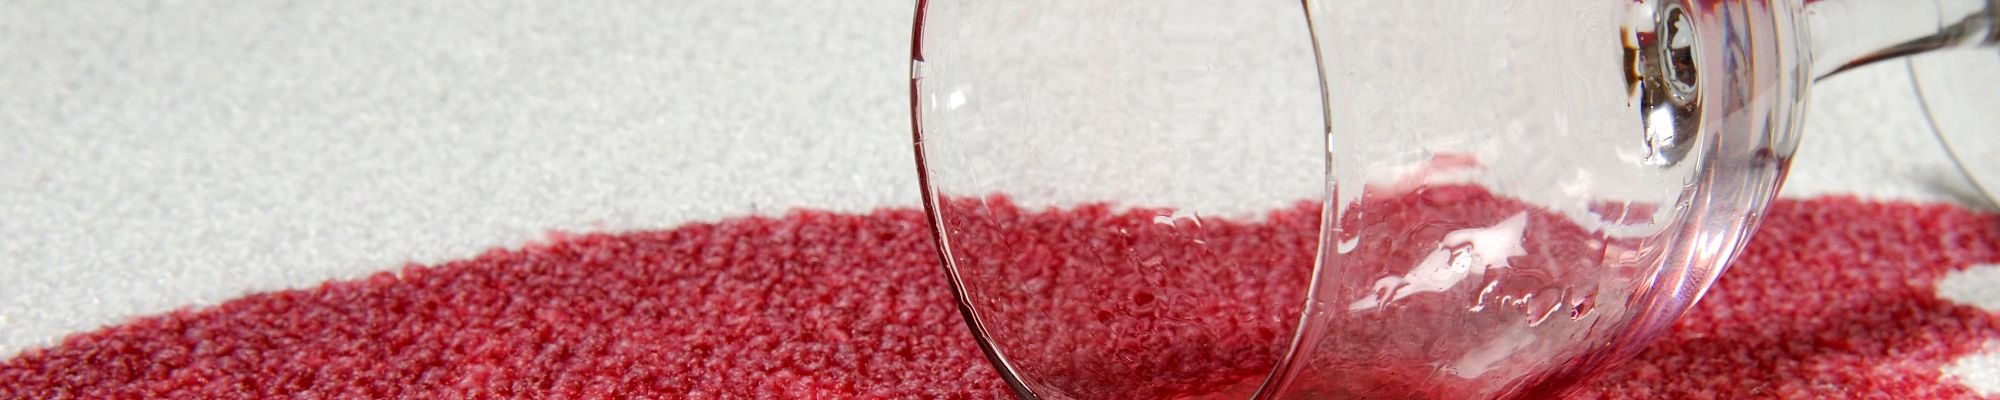 Spilled wine on carpet from Floortech Corporation in Greenwood, IN